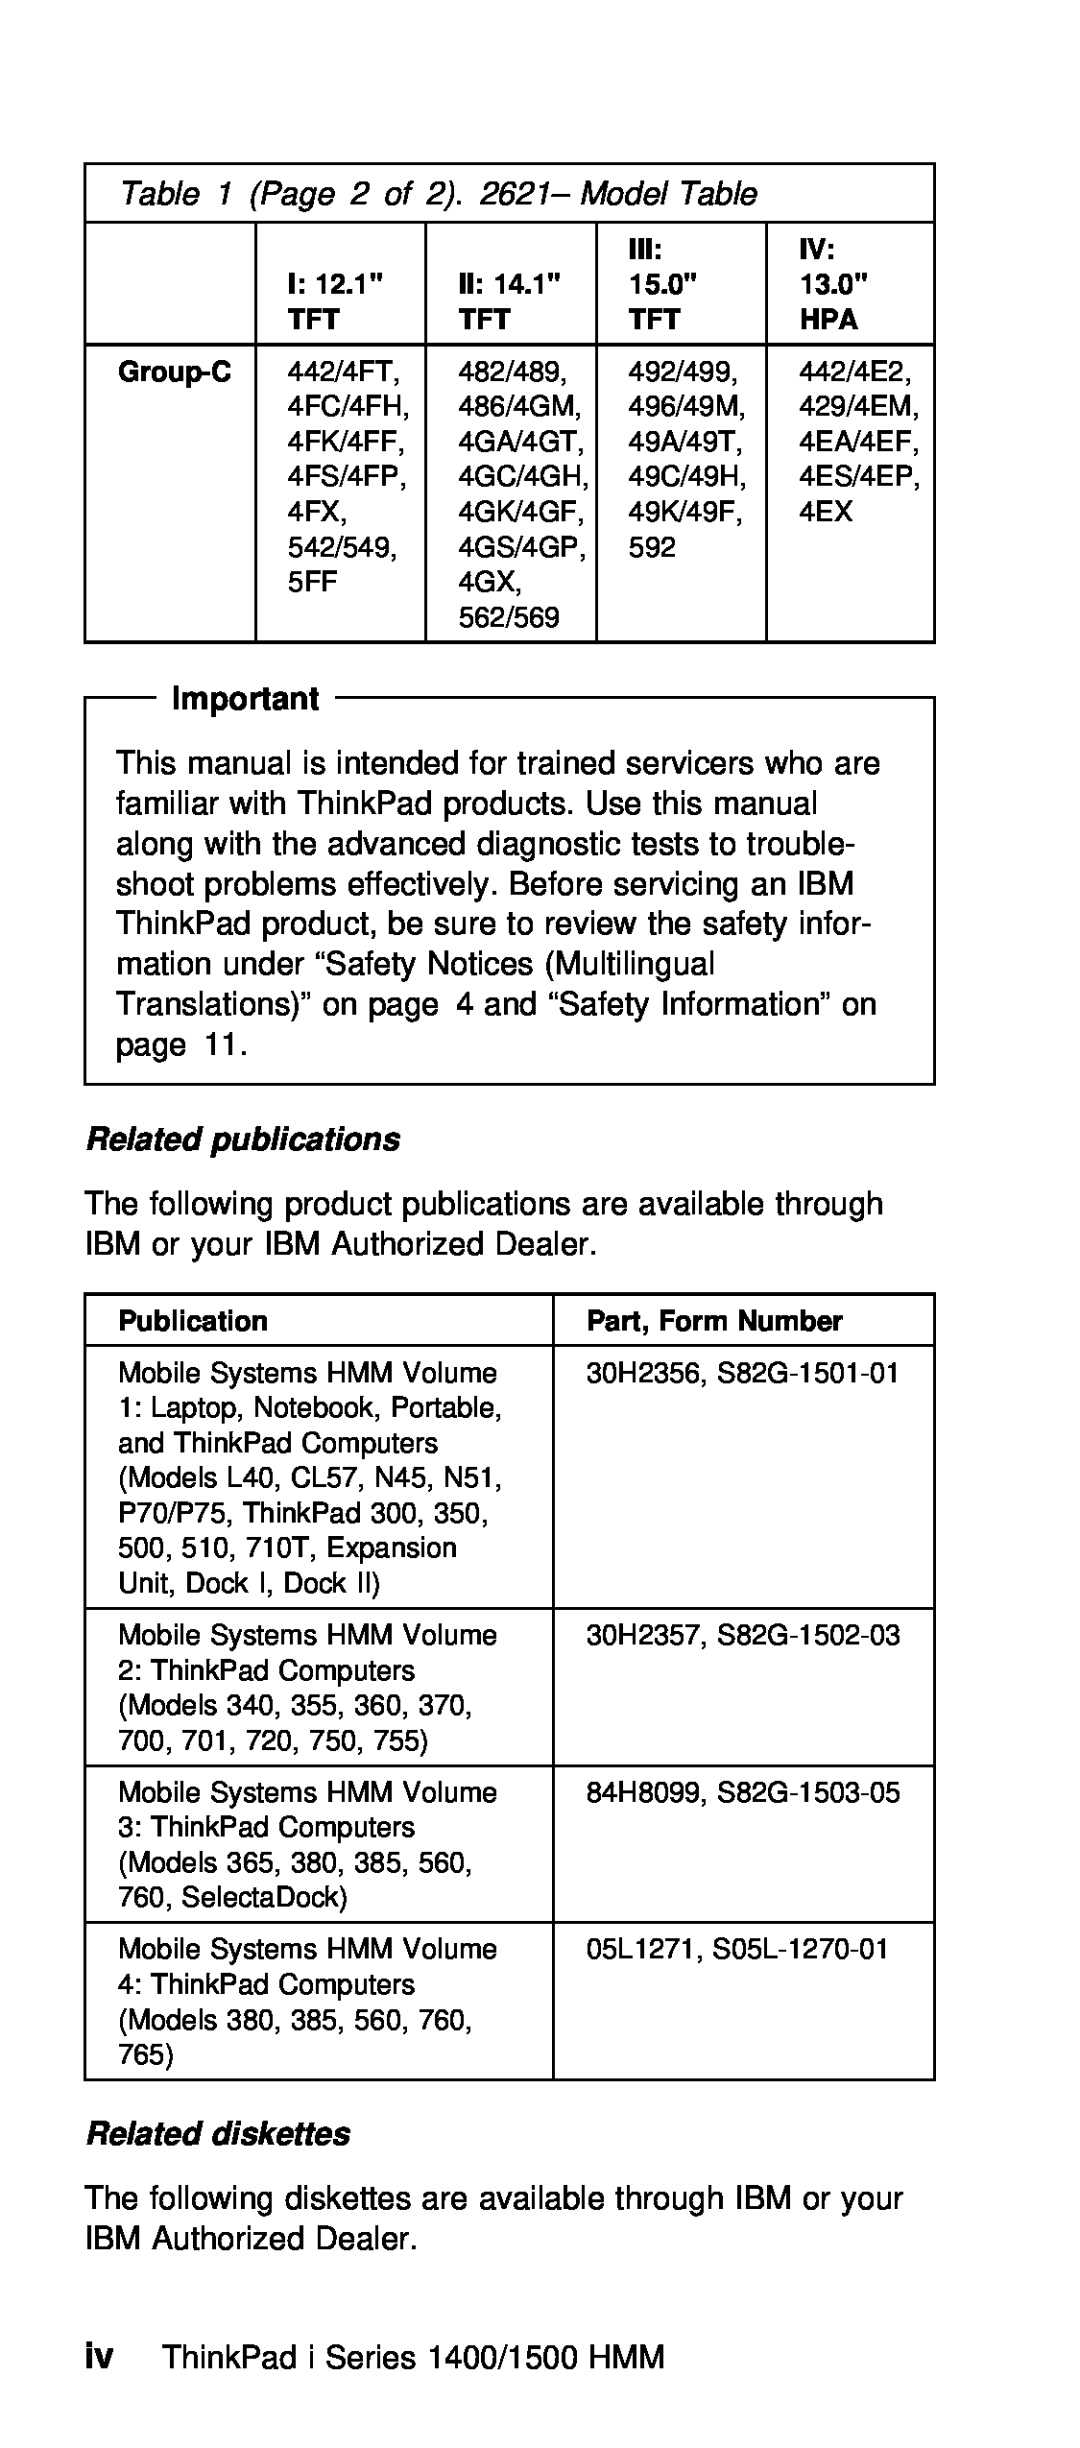 IBM Series 1500, Series 1400 manual Related publications, Related diskettes, Page, of 2. 2621- Model Table 